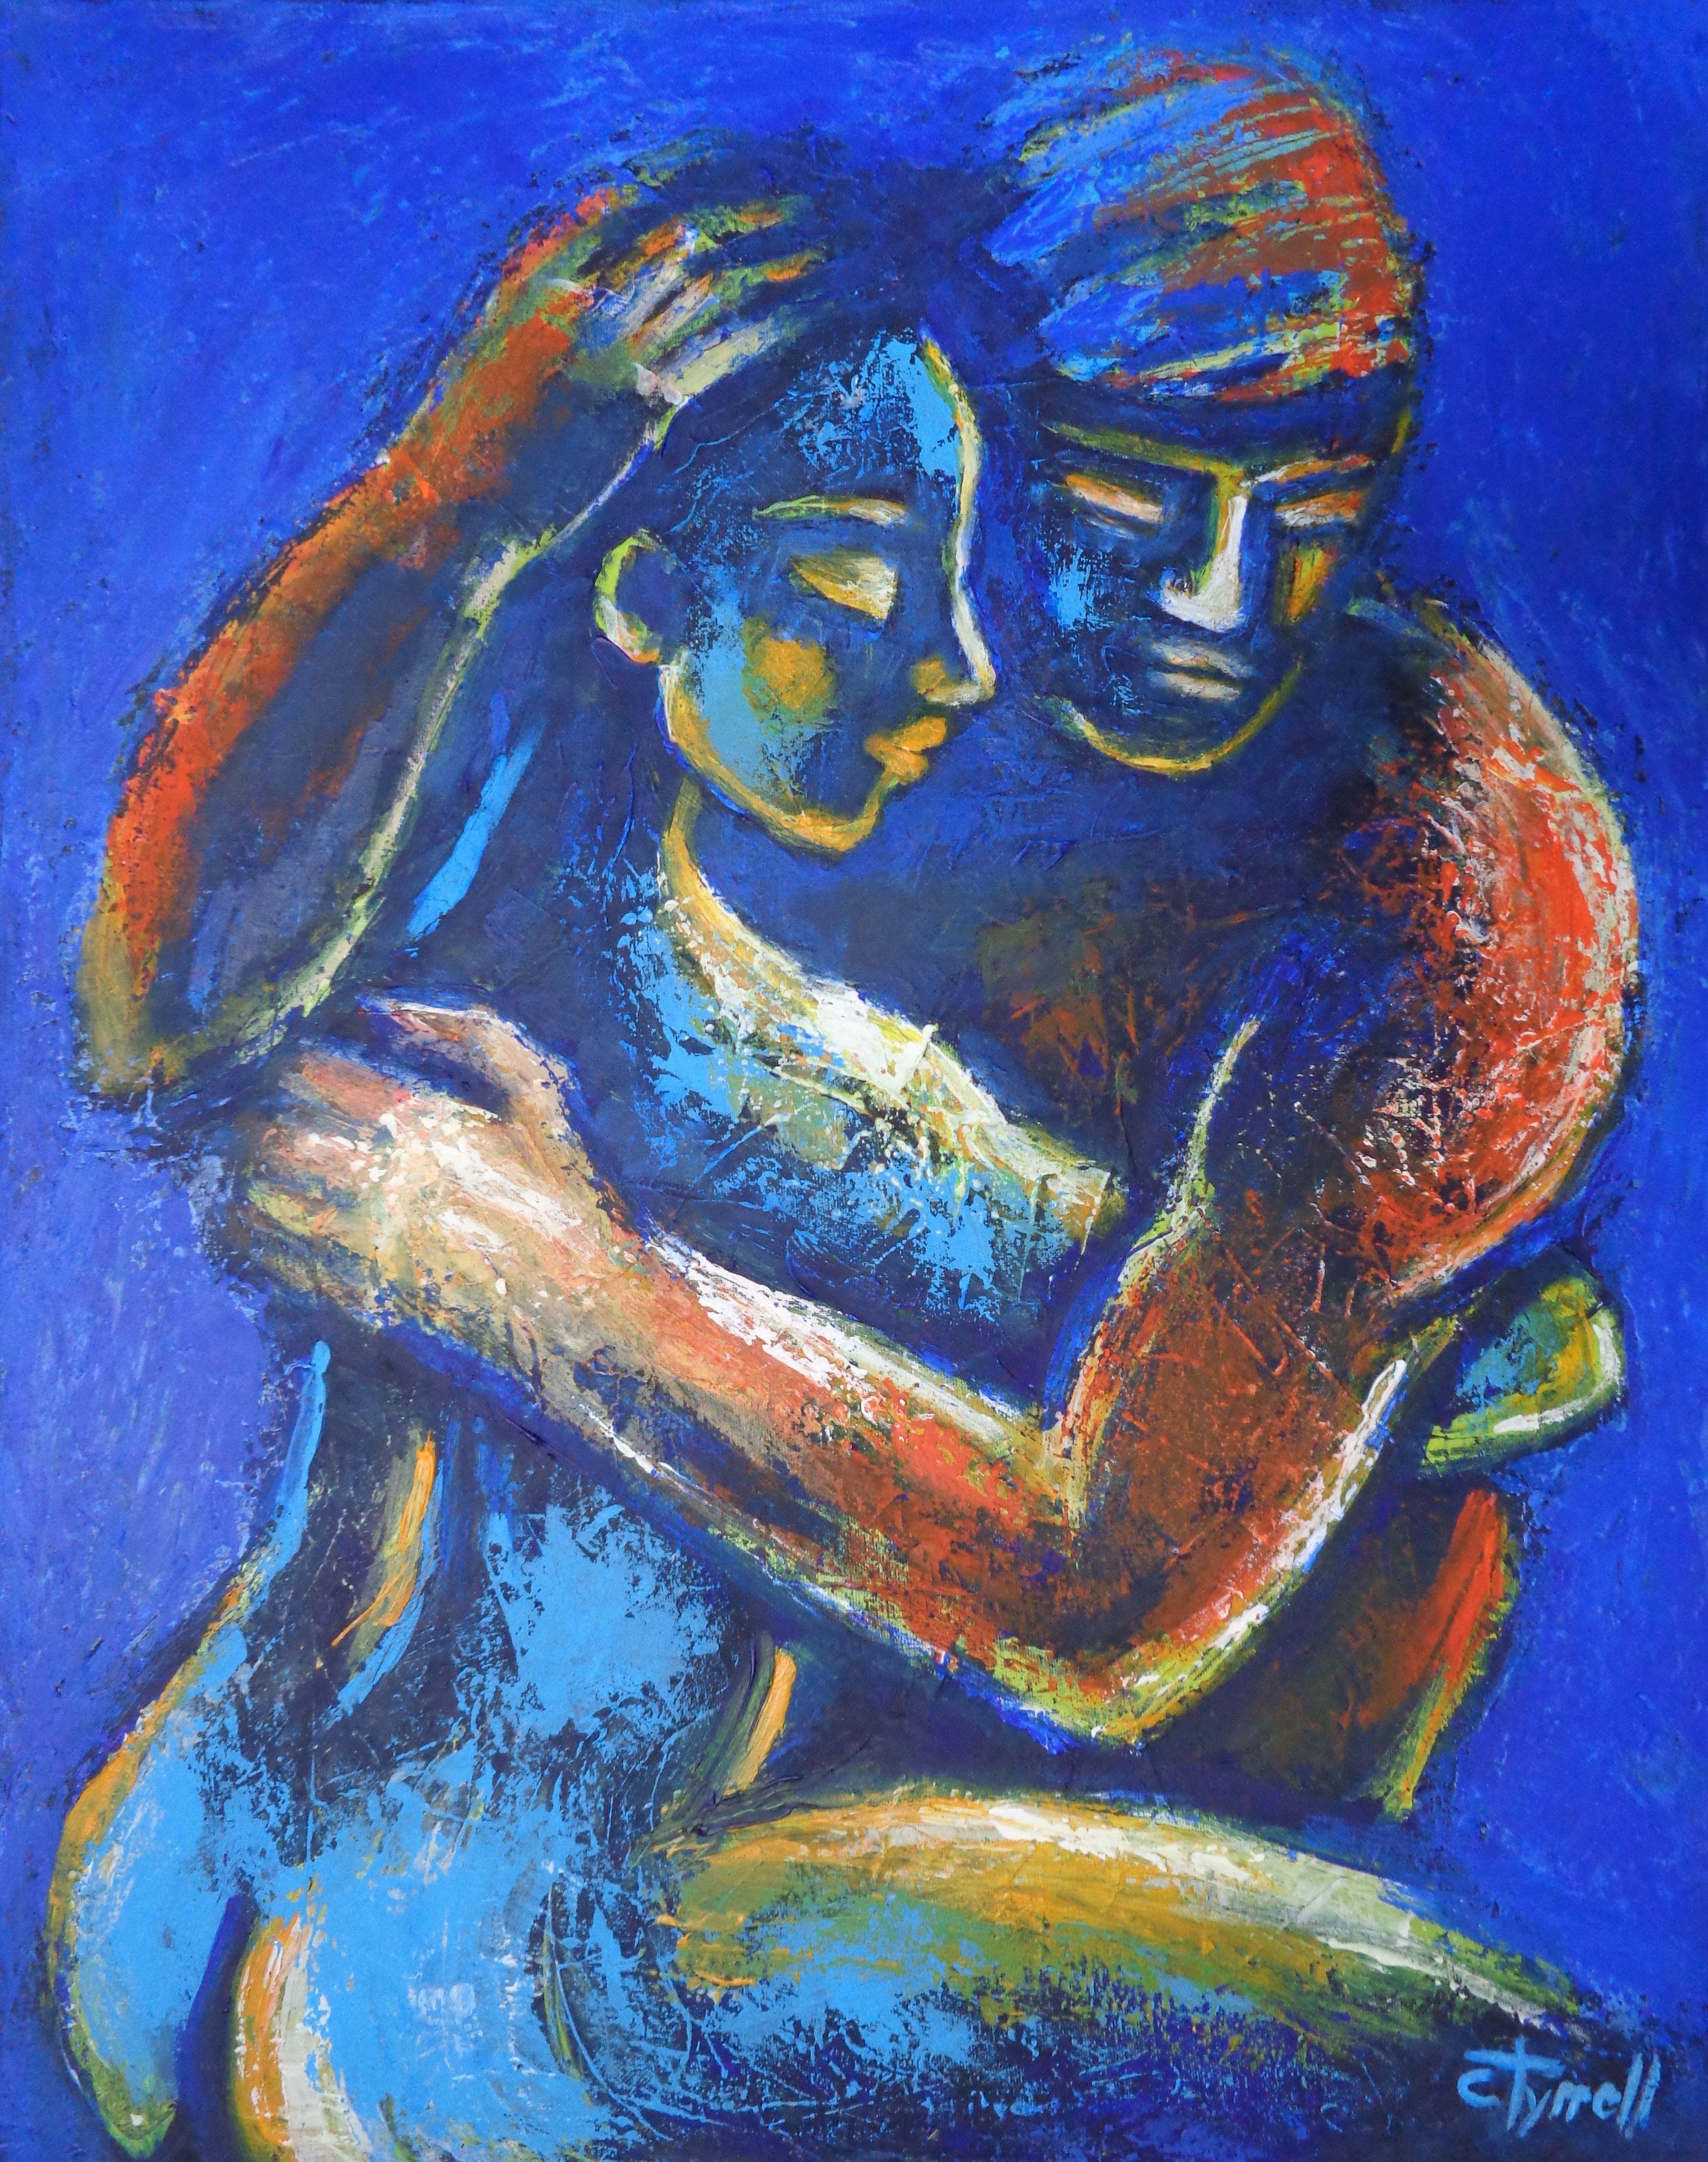 Original semi-abstract figurative acrylics painting on canvas, painted edges and ready to hang. Colourful and textured produced using the palette knife. The 10th artwork in the series "Night of Passion". Emotional image of embraced couple in love.